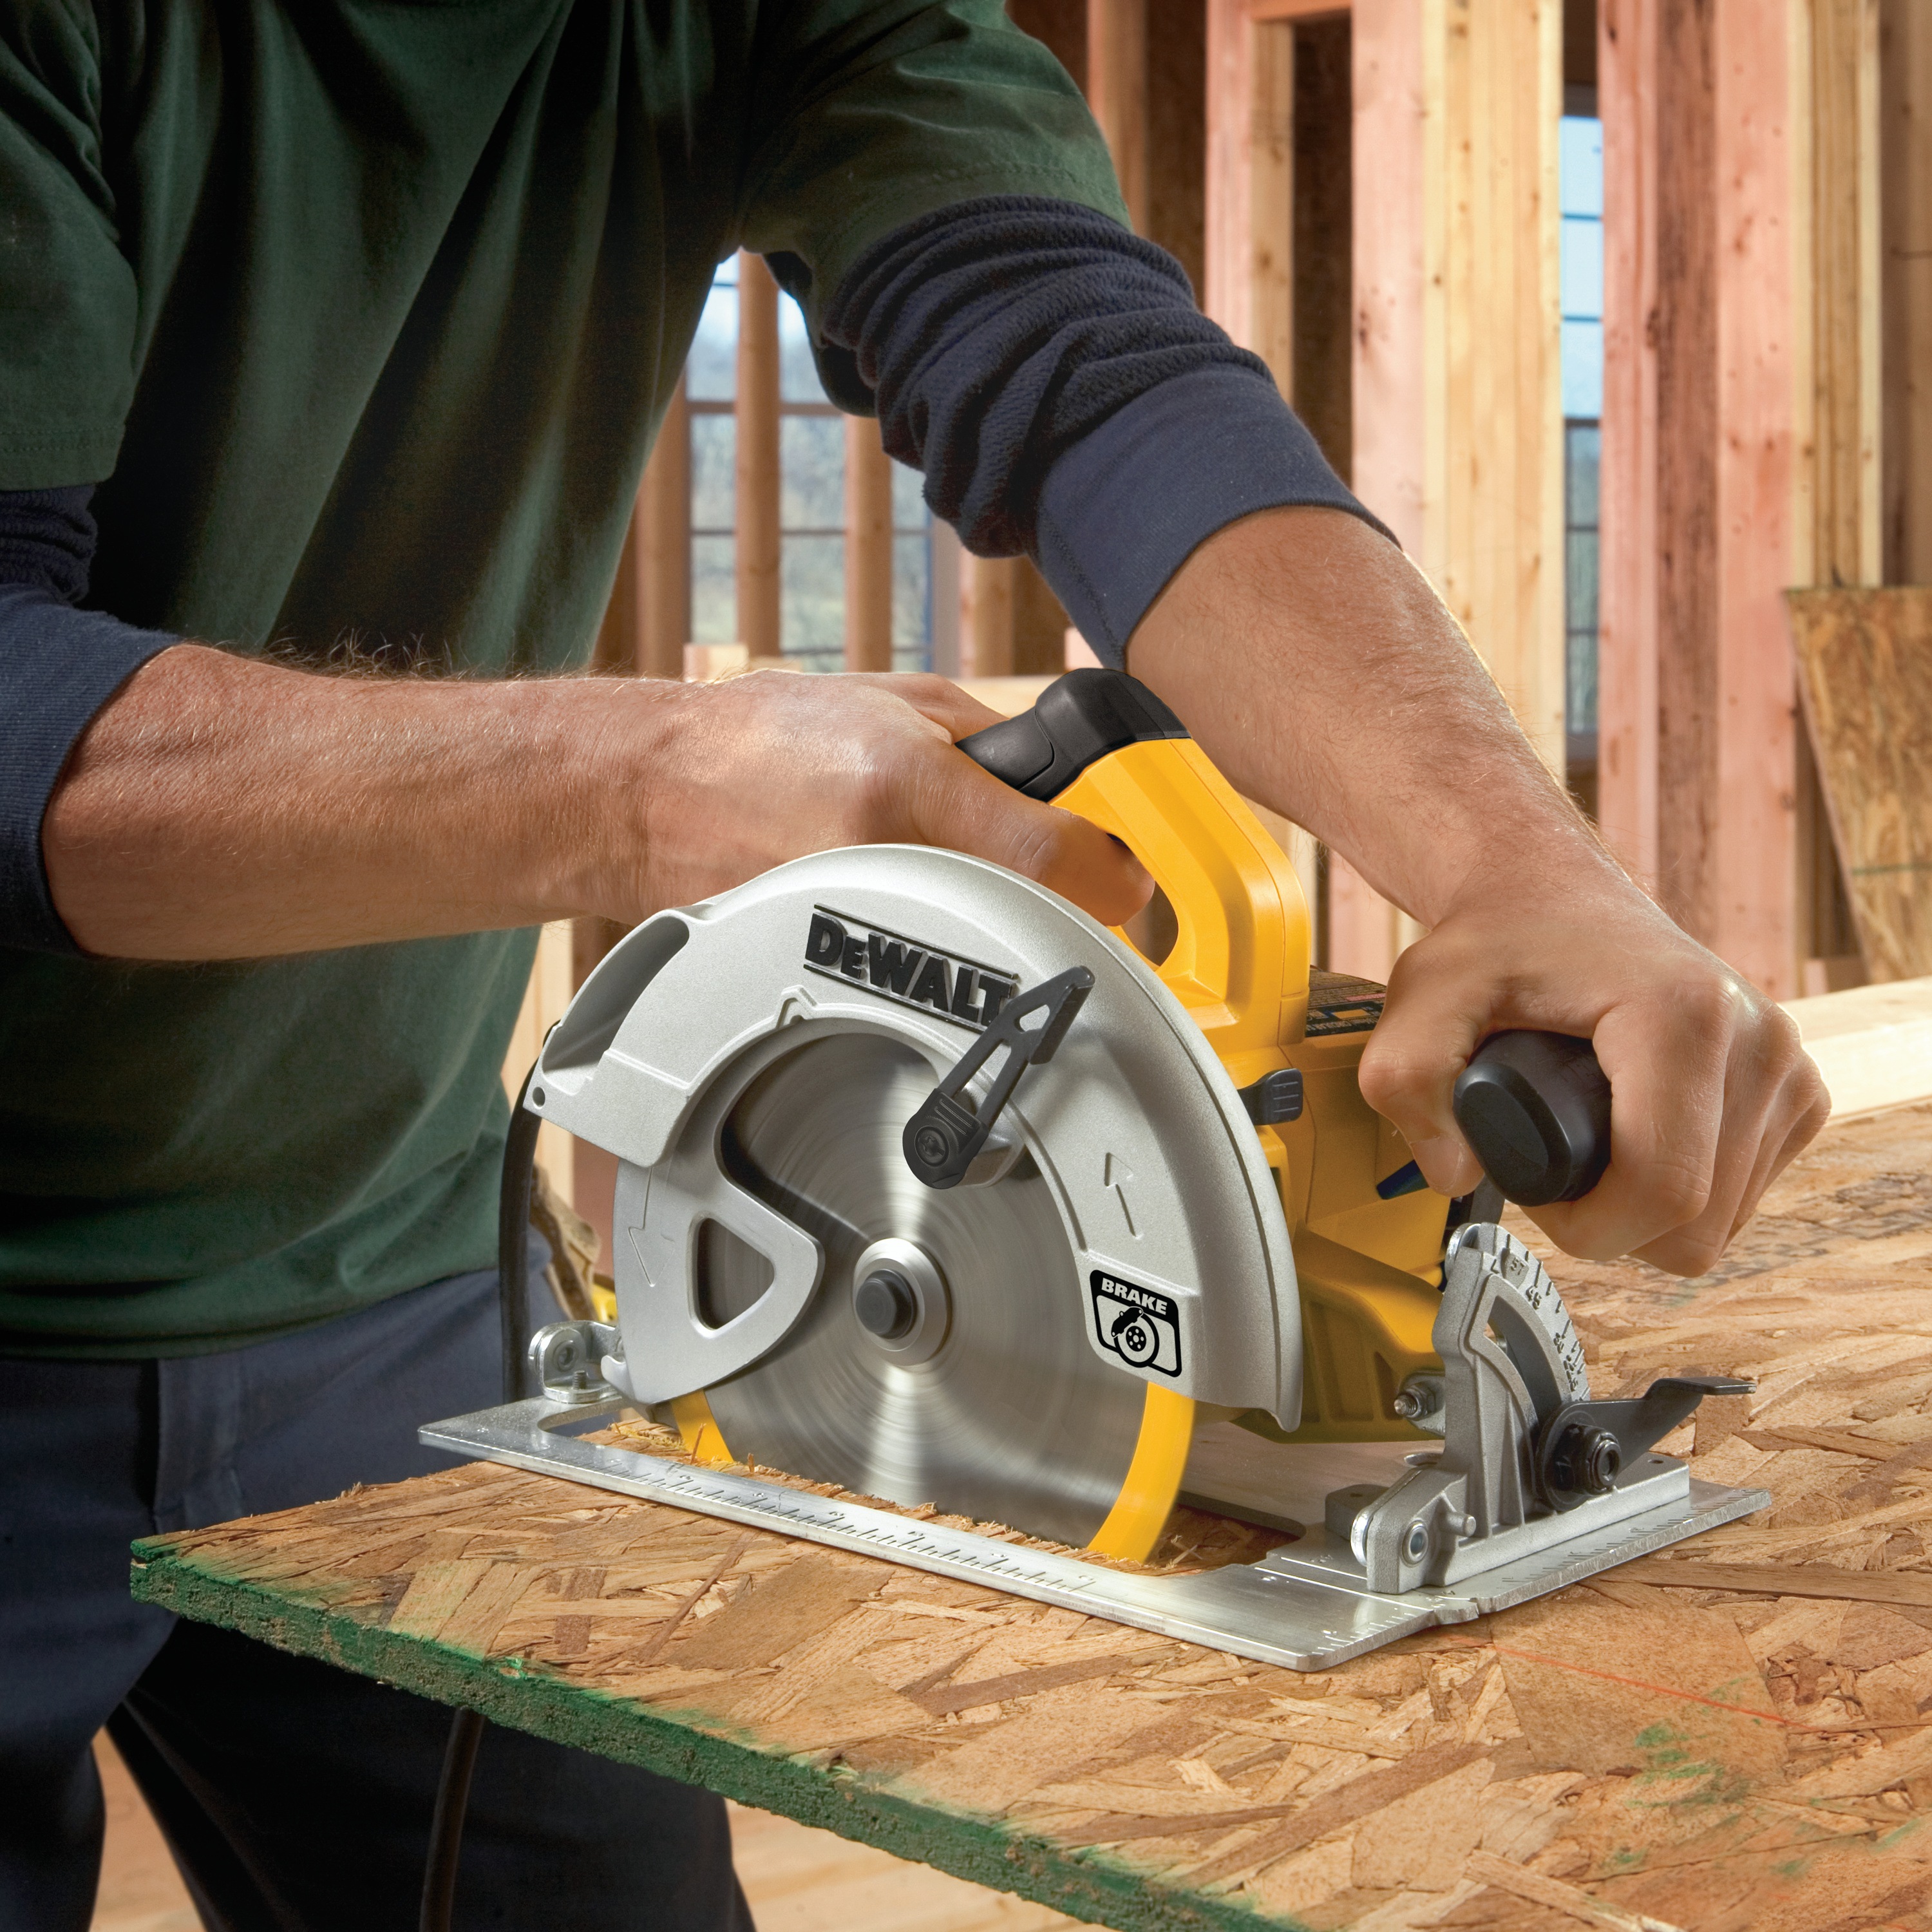 7 and one quarter inch lightweight circular saw sawing through a wooden sheet.